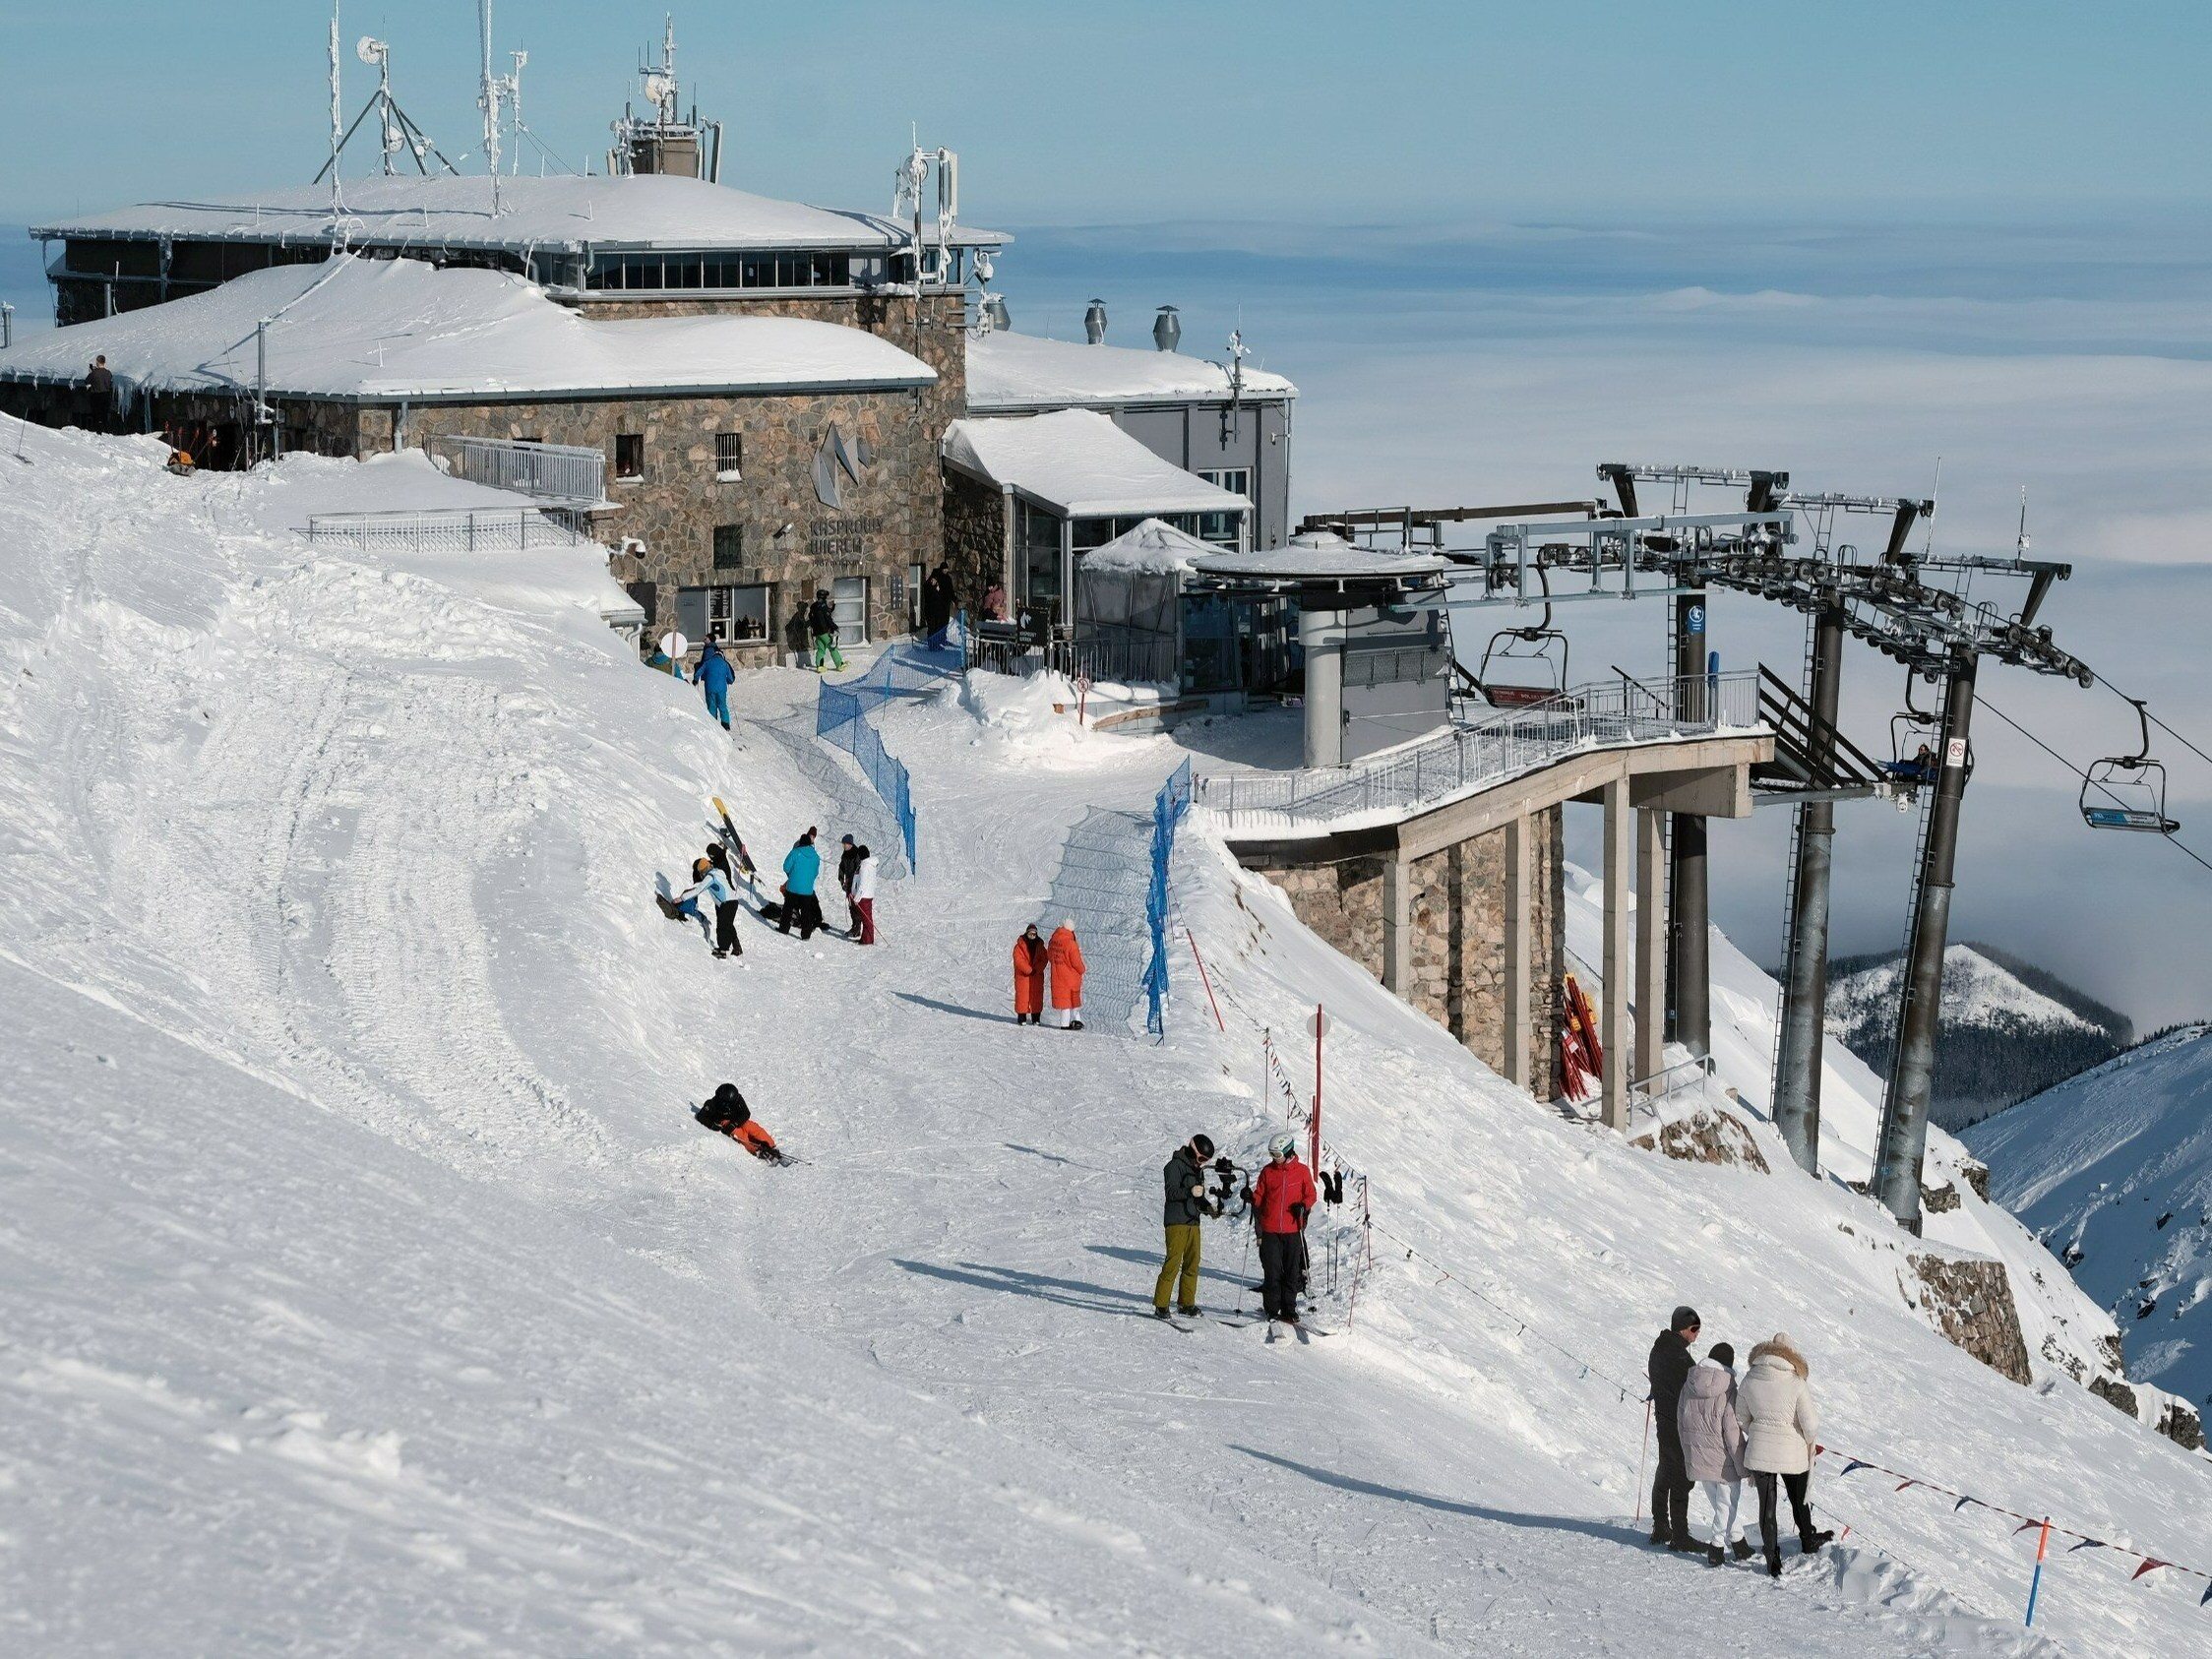 The famous attraction of the Tatra Mountains is closed.  The reason is difficult conditions